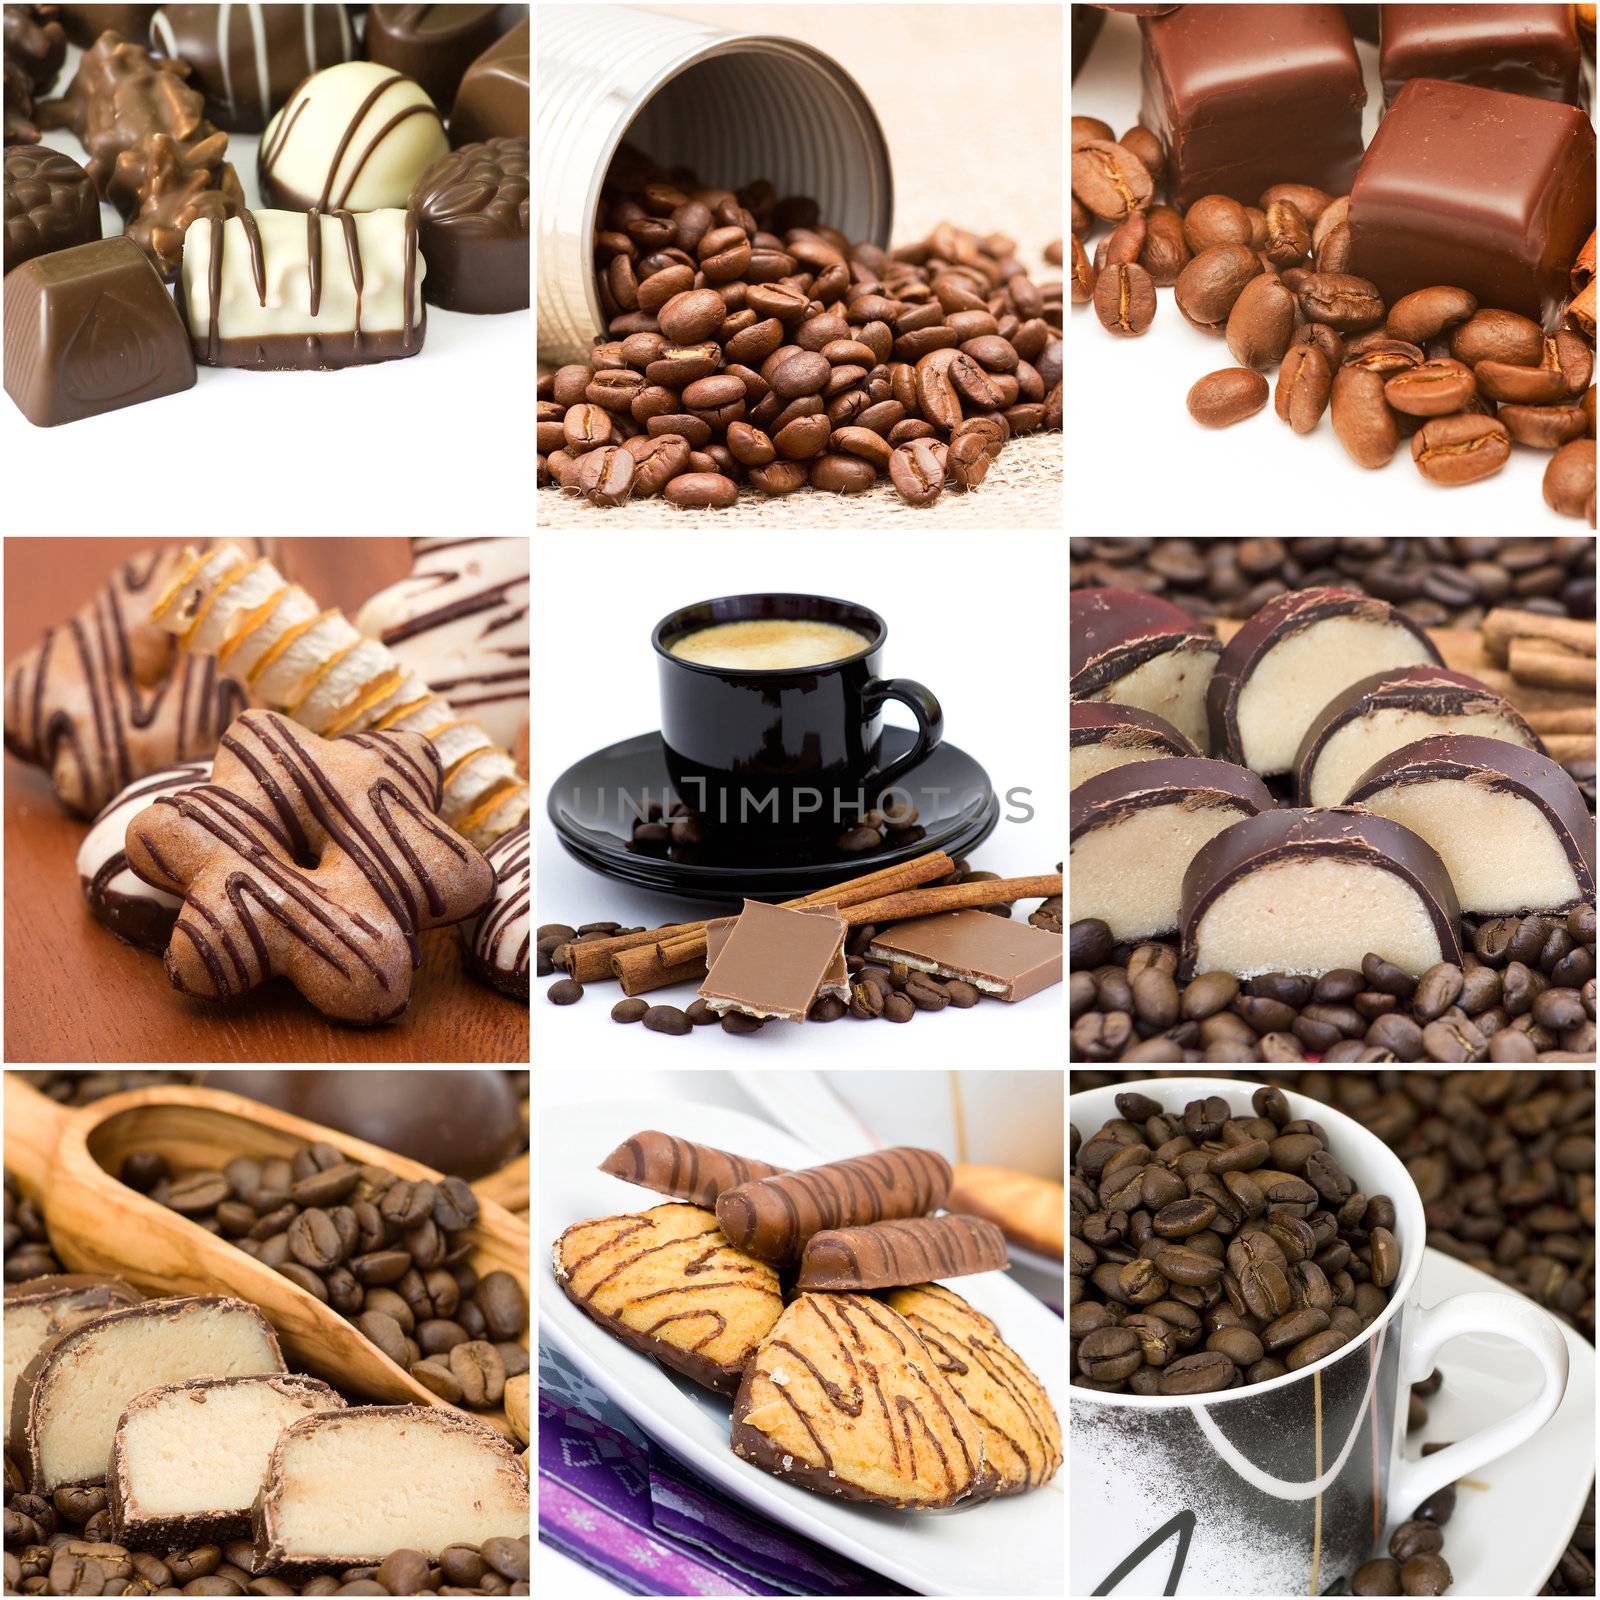 Collage with coffee, chocolate and cookies by miradrozdowski